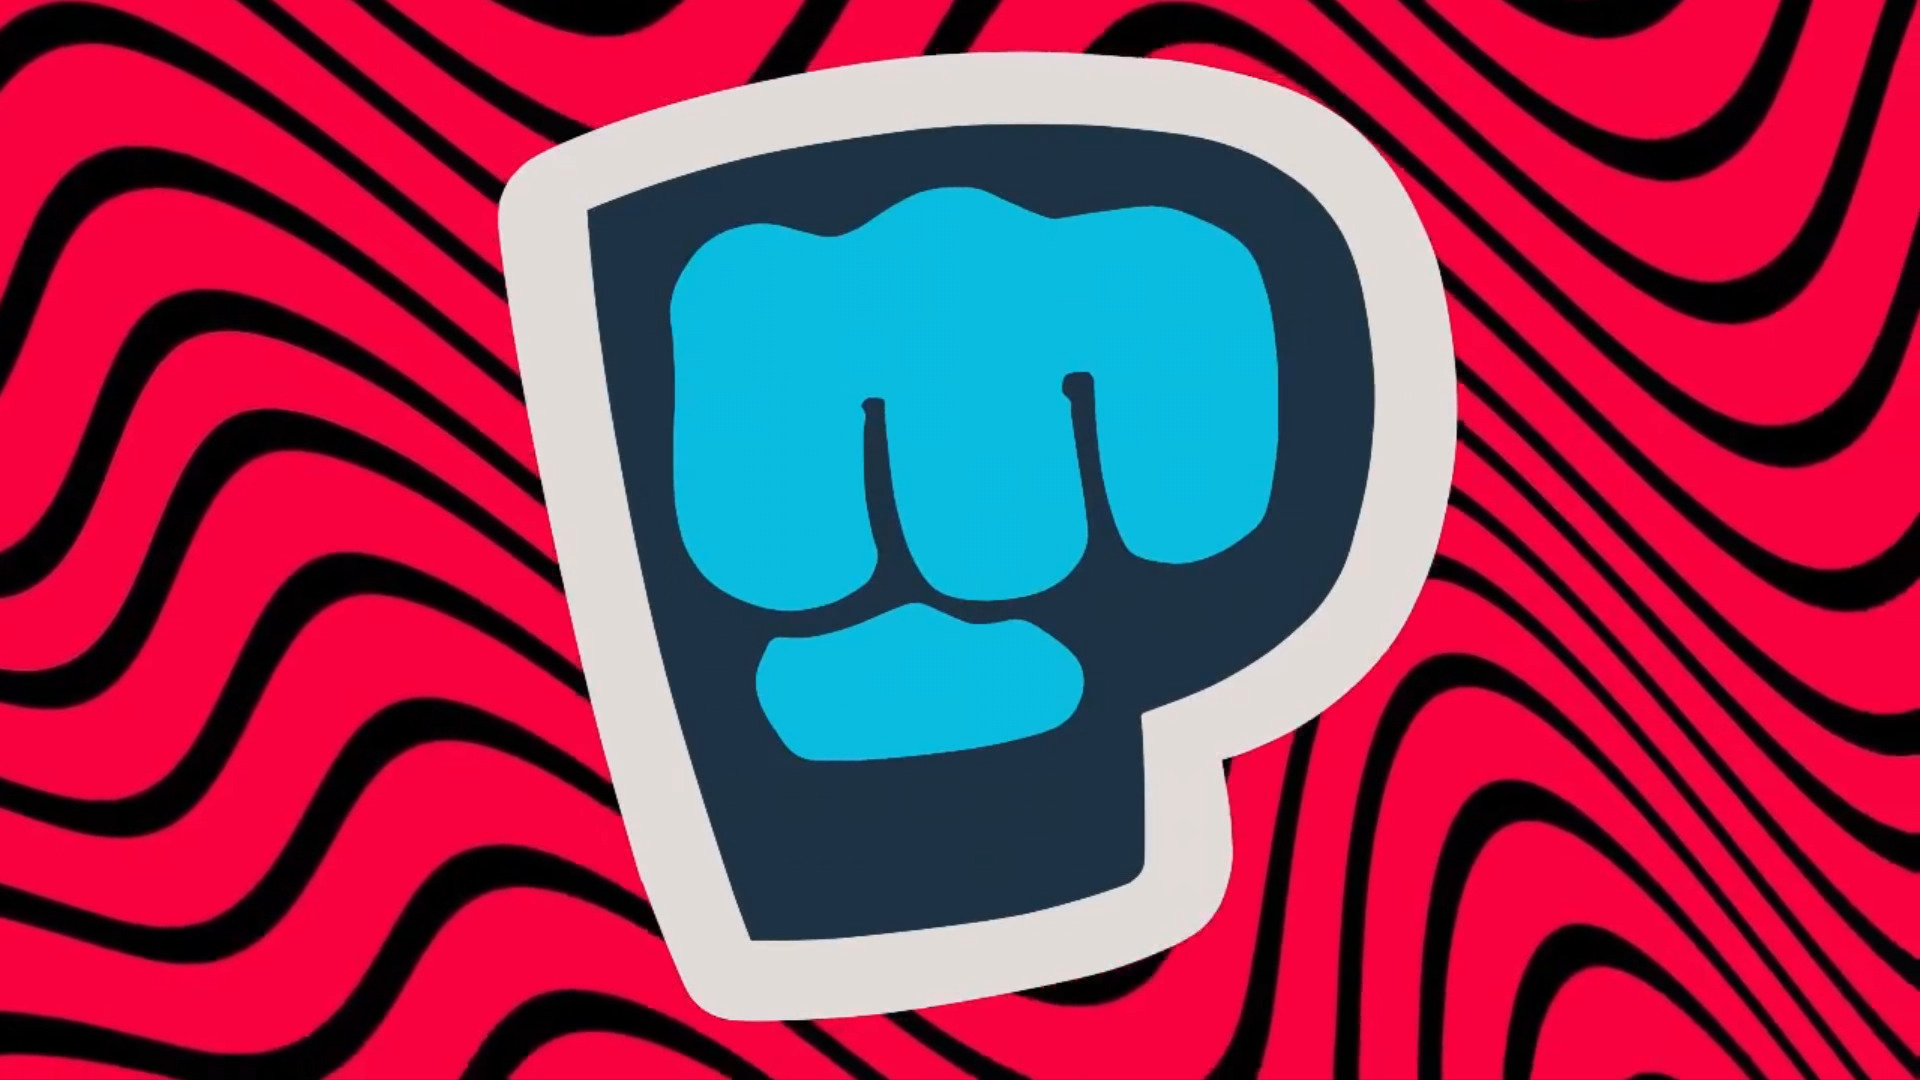 PewDiePie Has Not Been Shadowbanned On YouTube; Internet Star States That It’s Simply A Current Bug